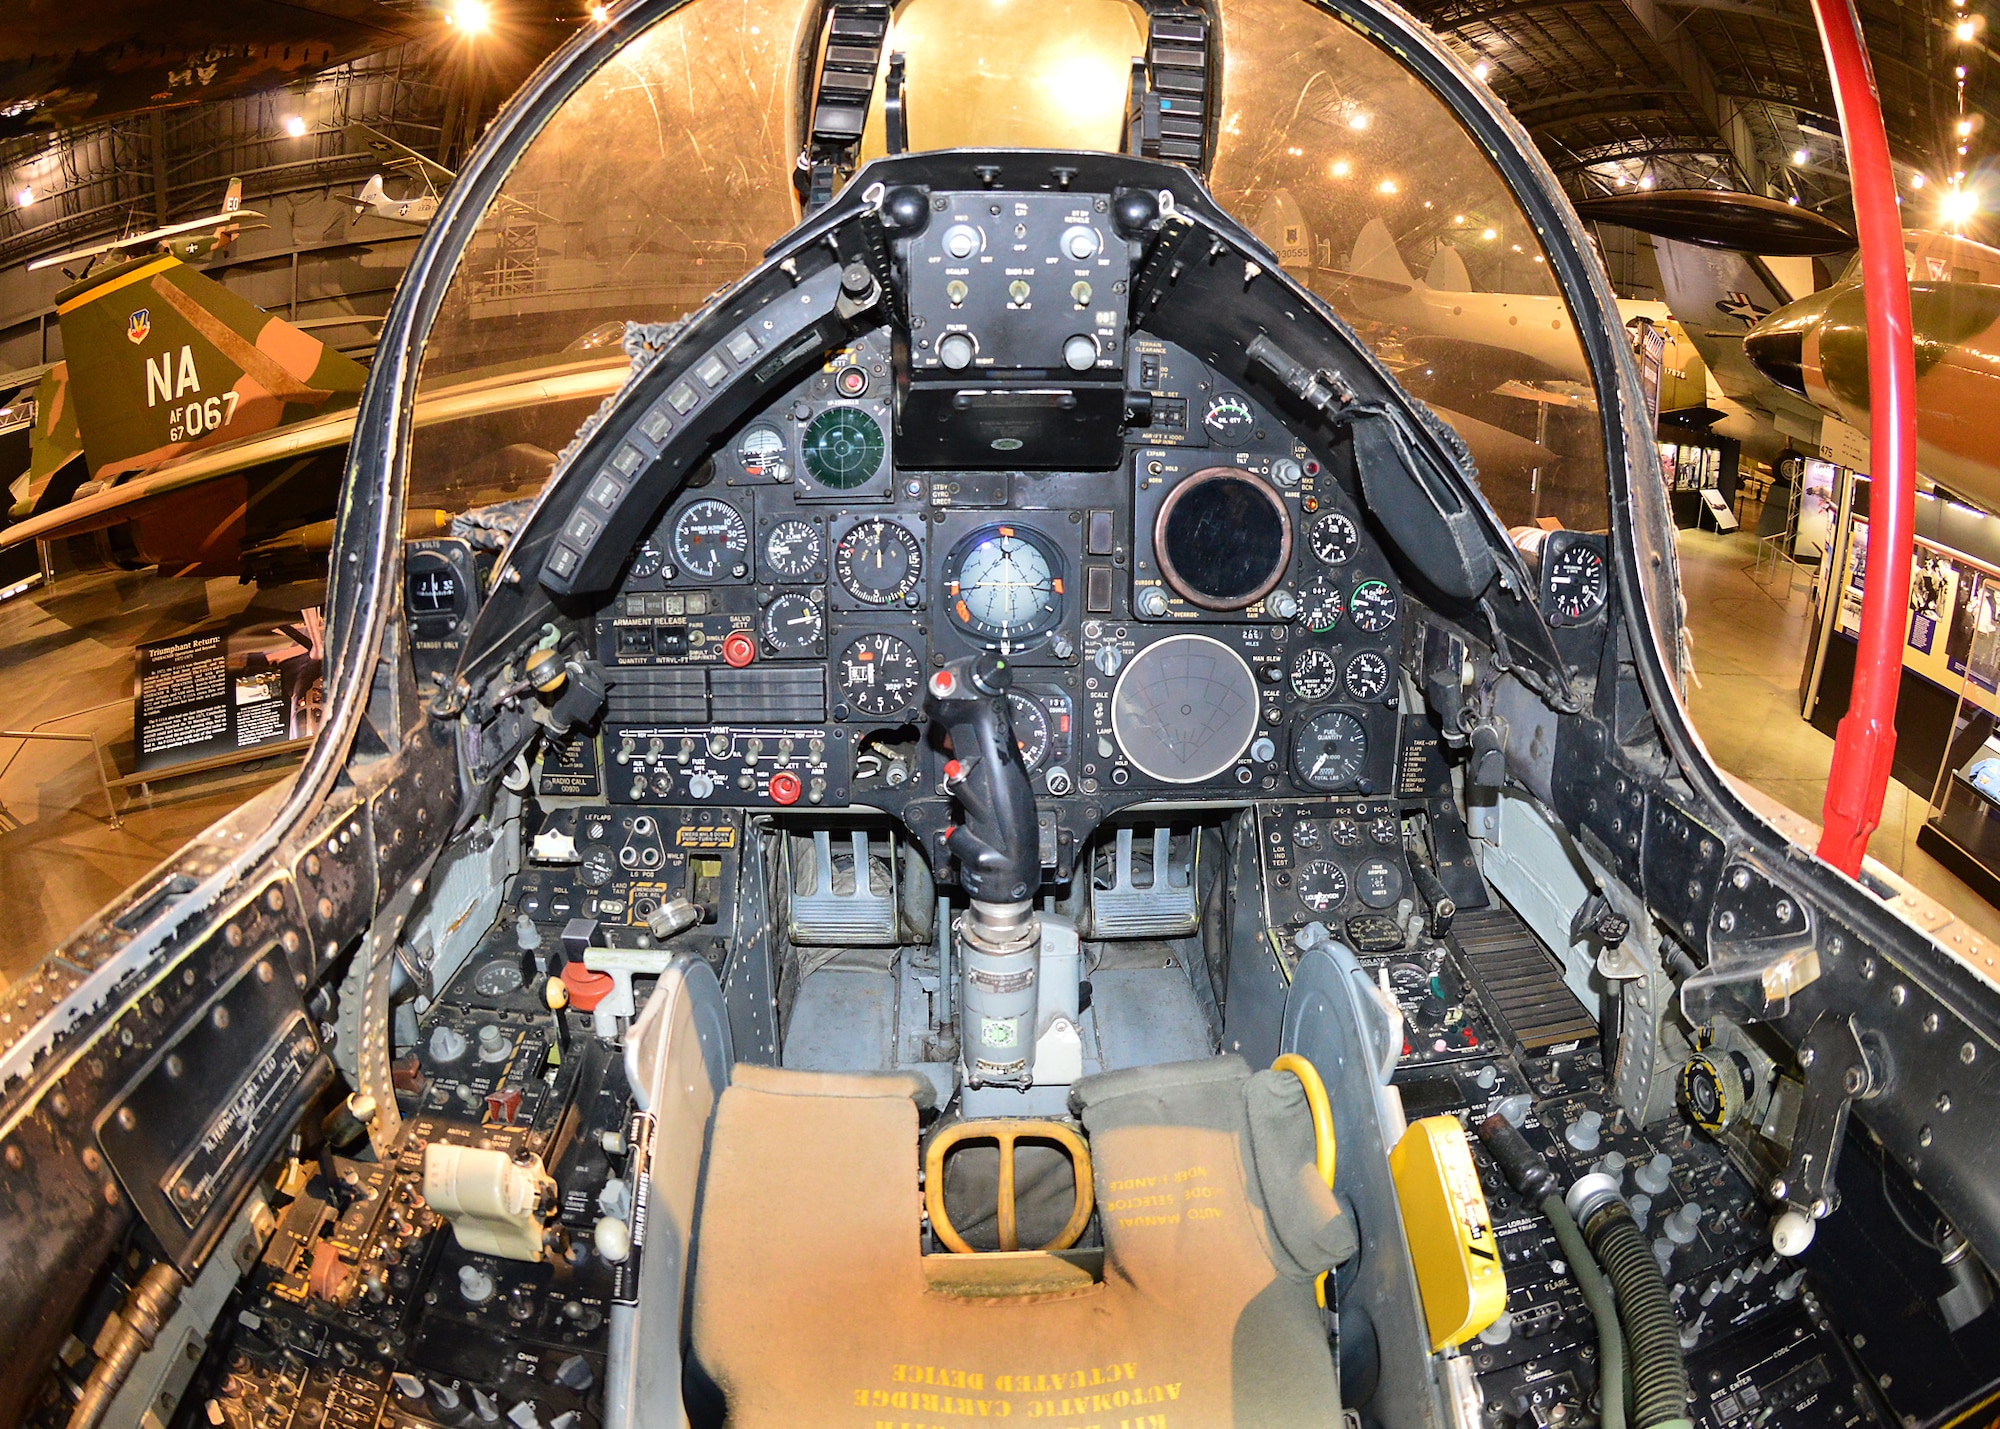 DAYTON, Ohio - LTV A-7D Corsair II cockpit in the Southeast Asia War Gallery at the National Museum of the U.S. Air Force. (U.S. Air Force photo by Ken LaRock)